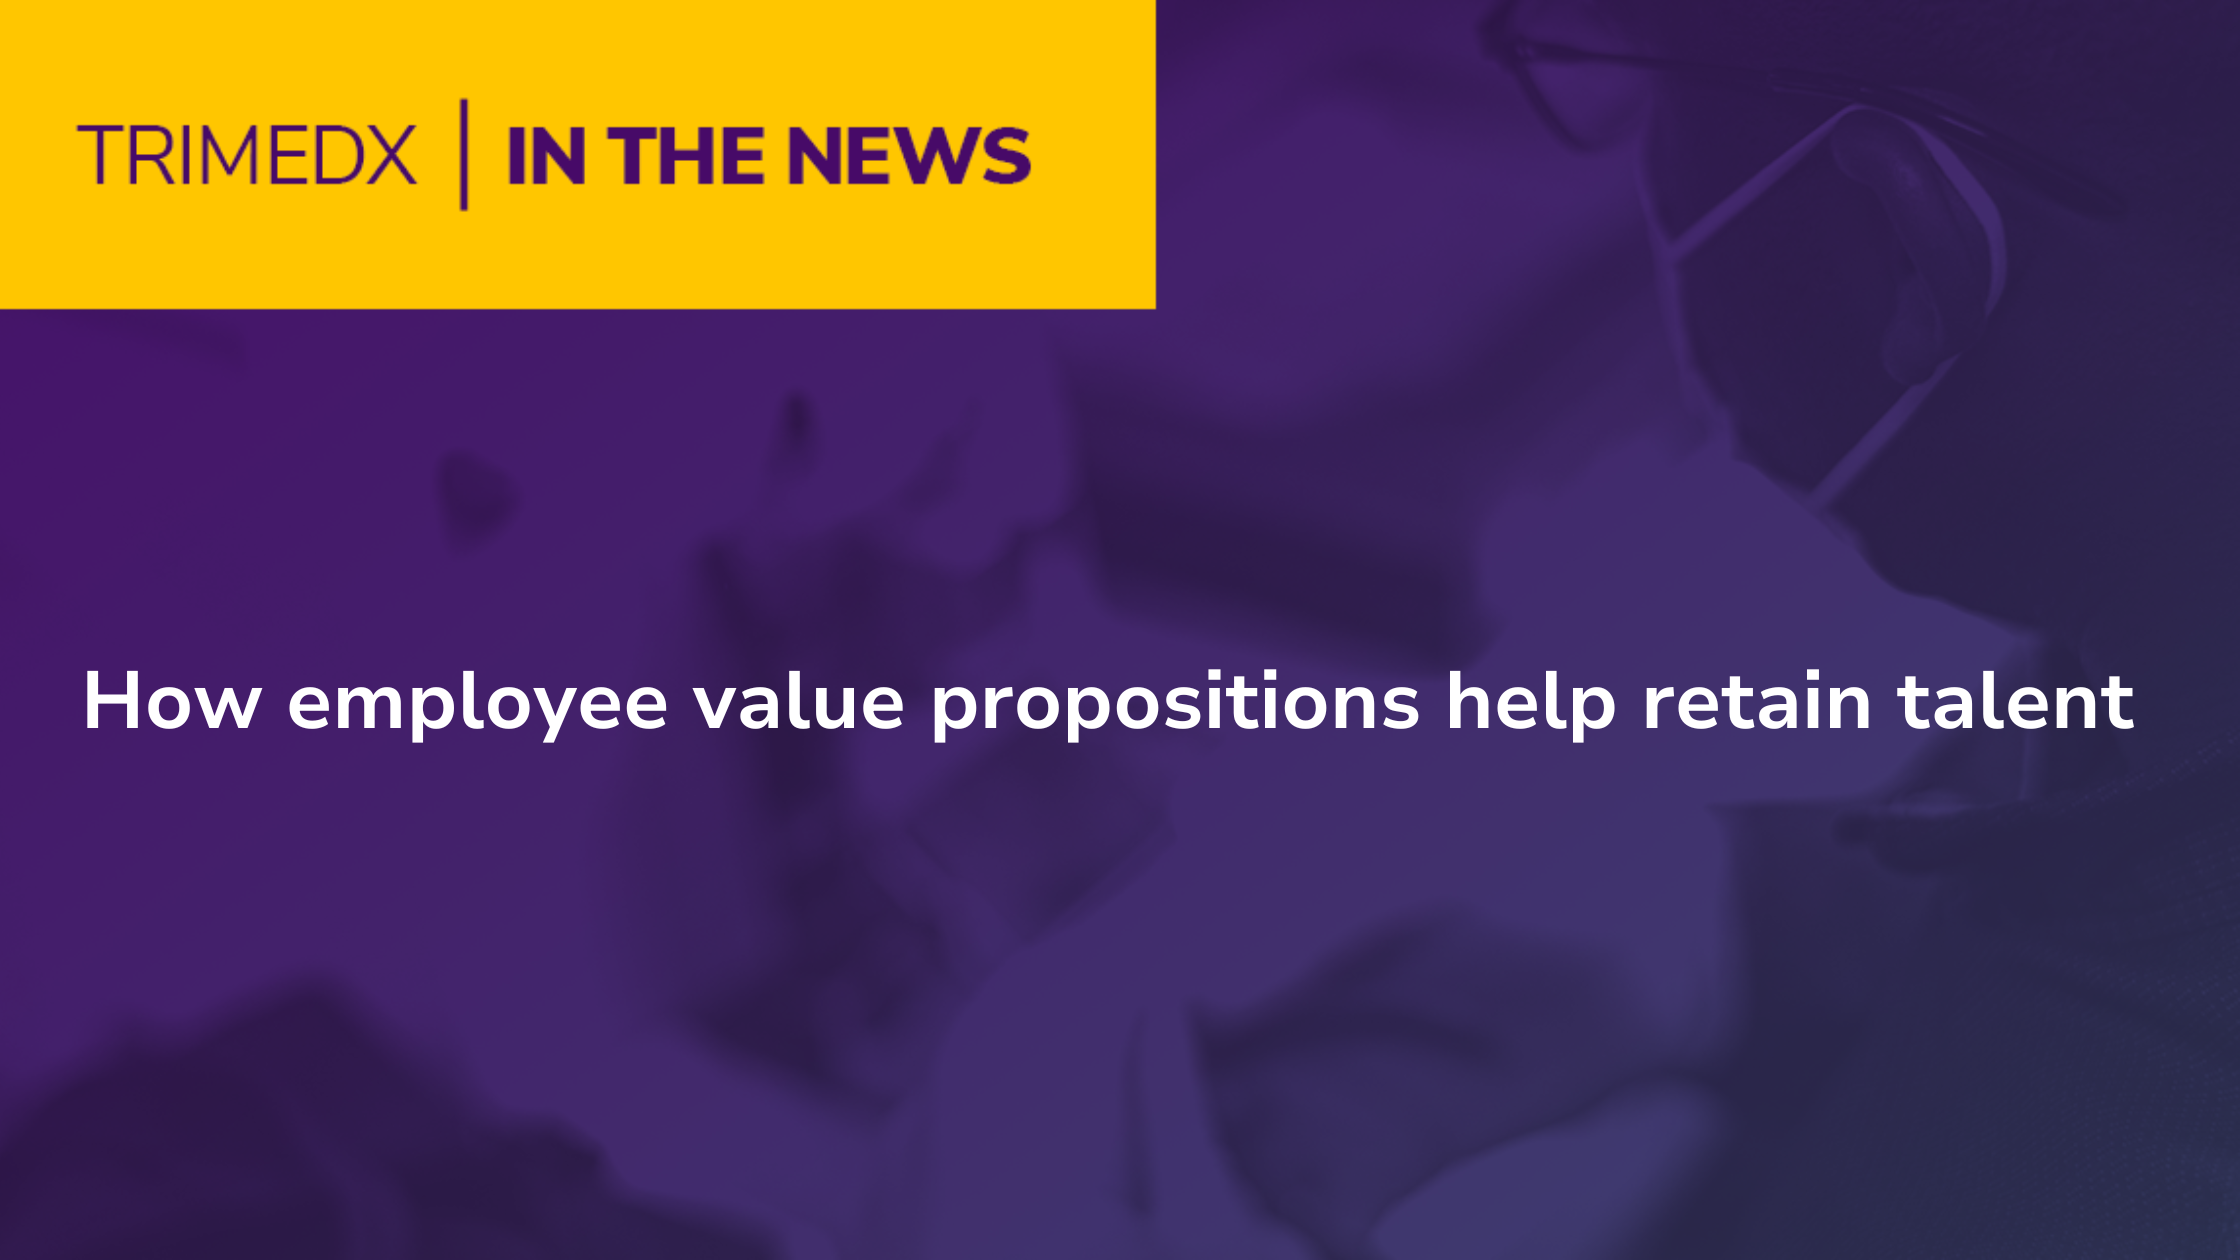 How employee value propositions help retain talent - TRIMEDX in the news graphic